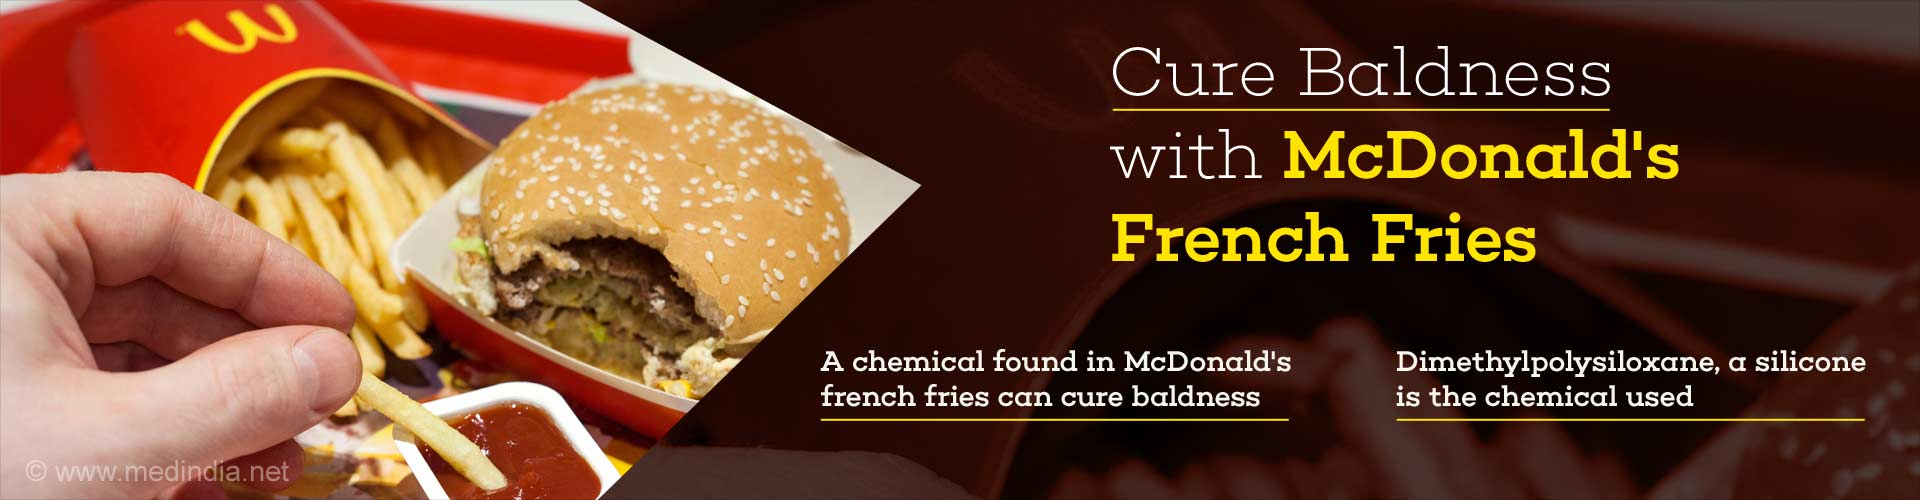 cure baldness with Mcdonald's french fries
- a chemical found in Mcdonald's french fries can cure baldness
- dimethylpolysiloxane, a silicone is the chemical used